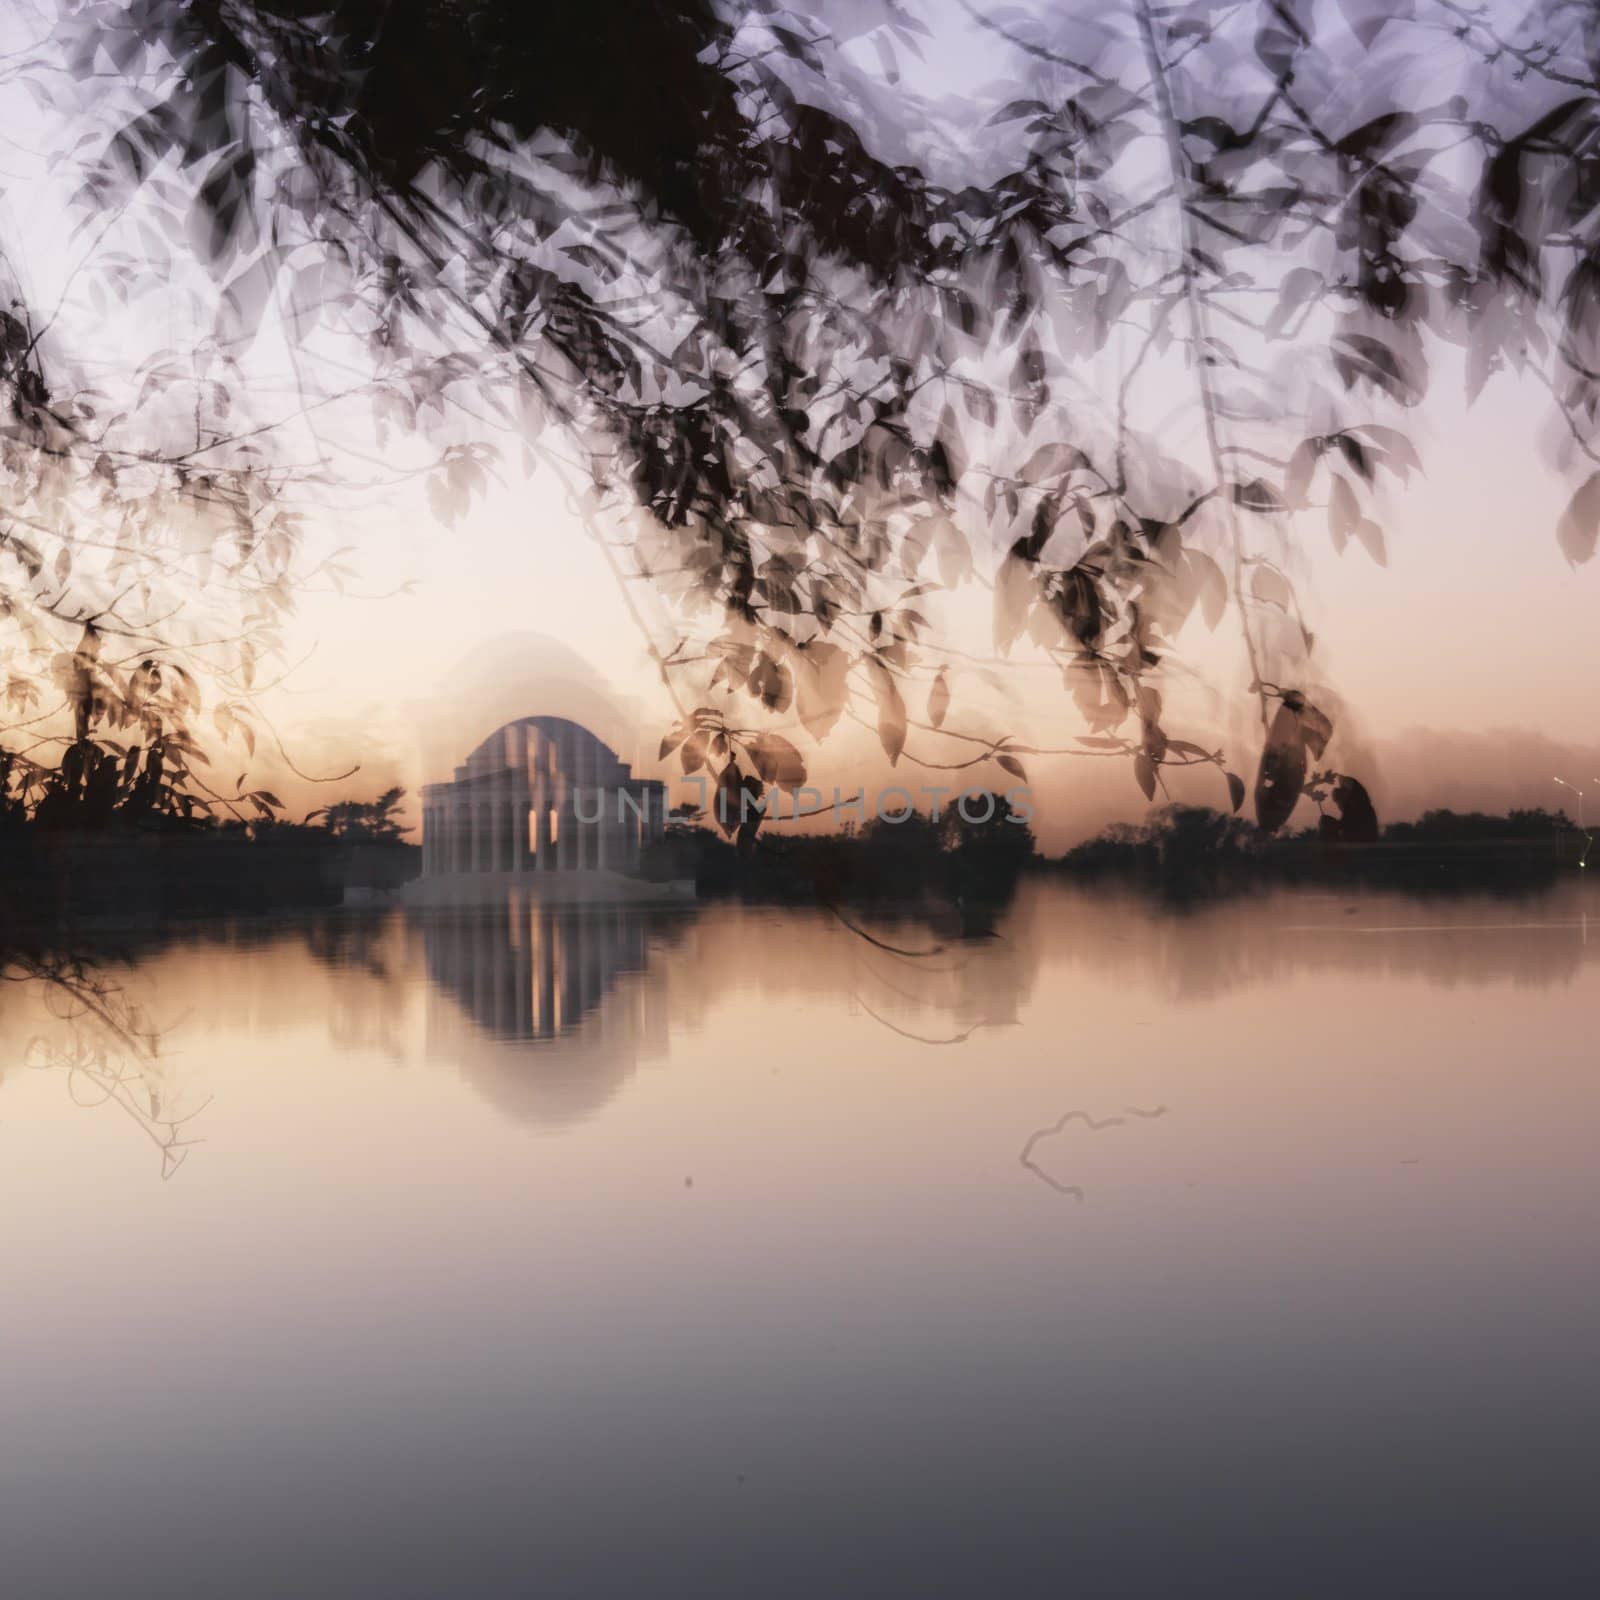 Jefferson Memorial reflected in water in Washington, D.C., USA.